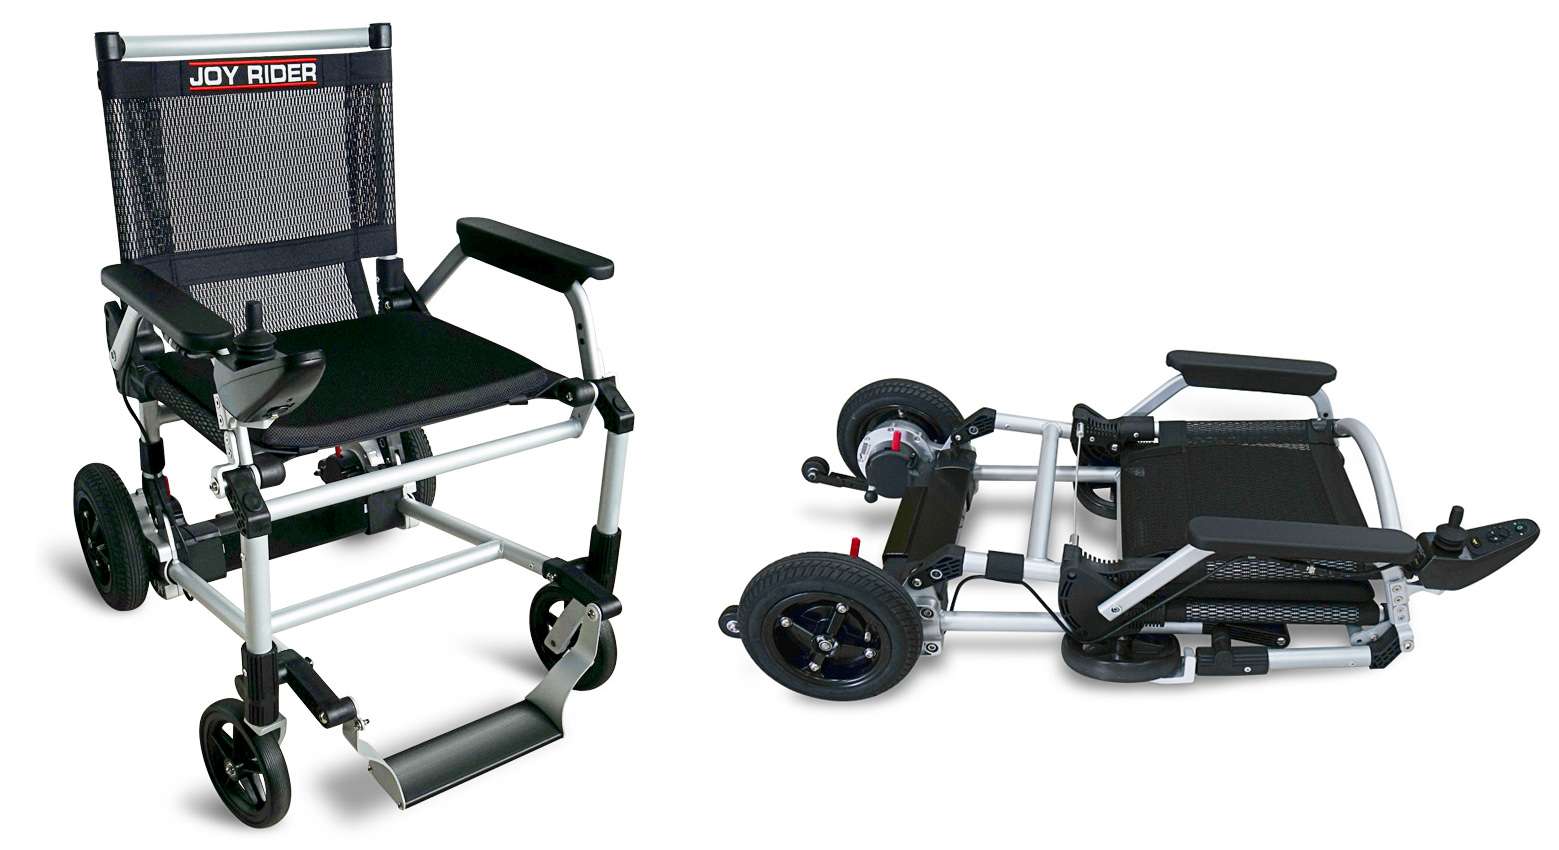 Joy Riders are ideal electric wheelchairs for cars because they fold down to such a small size